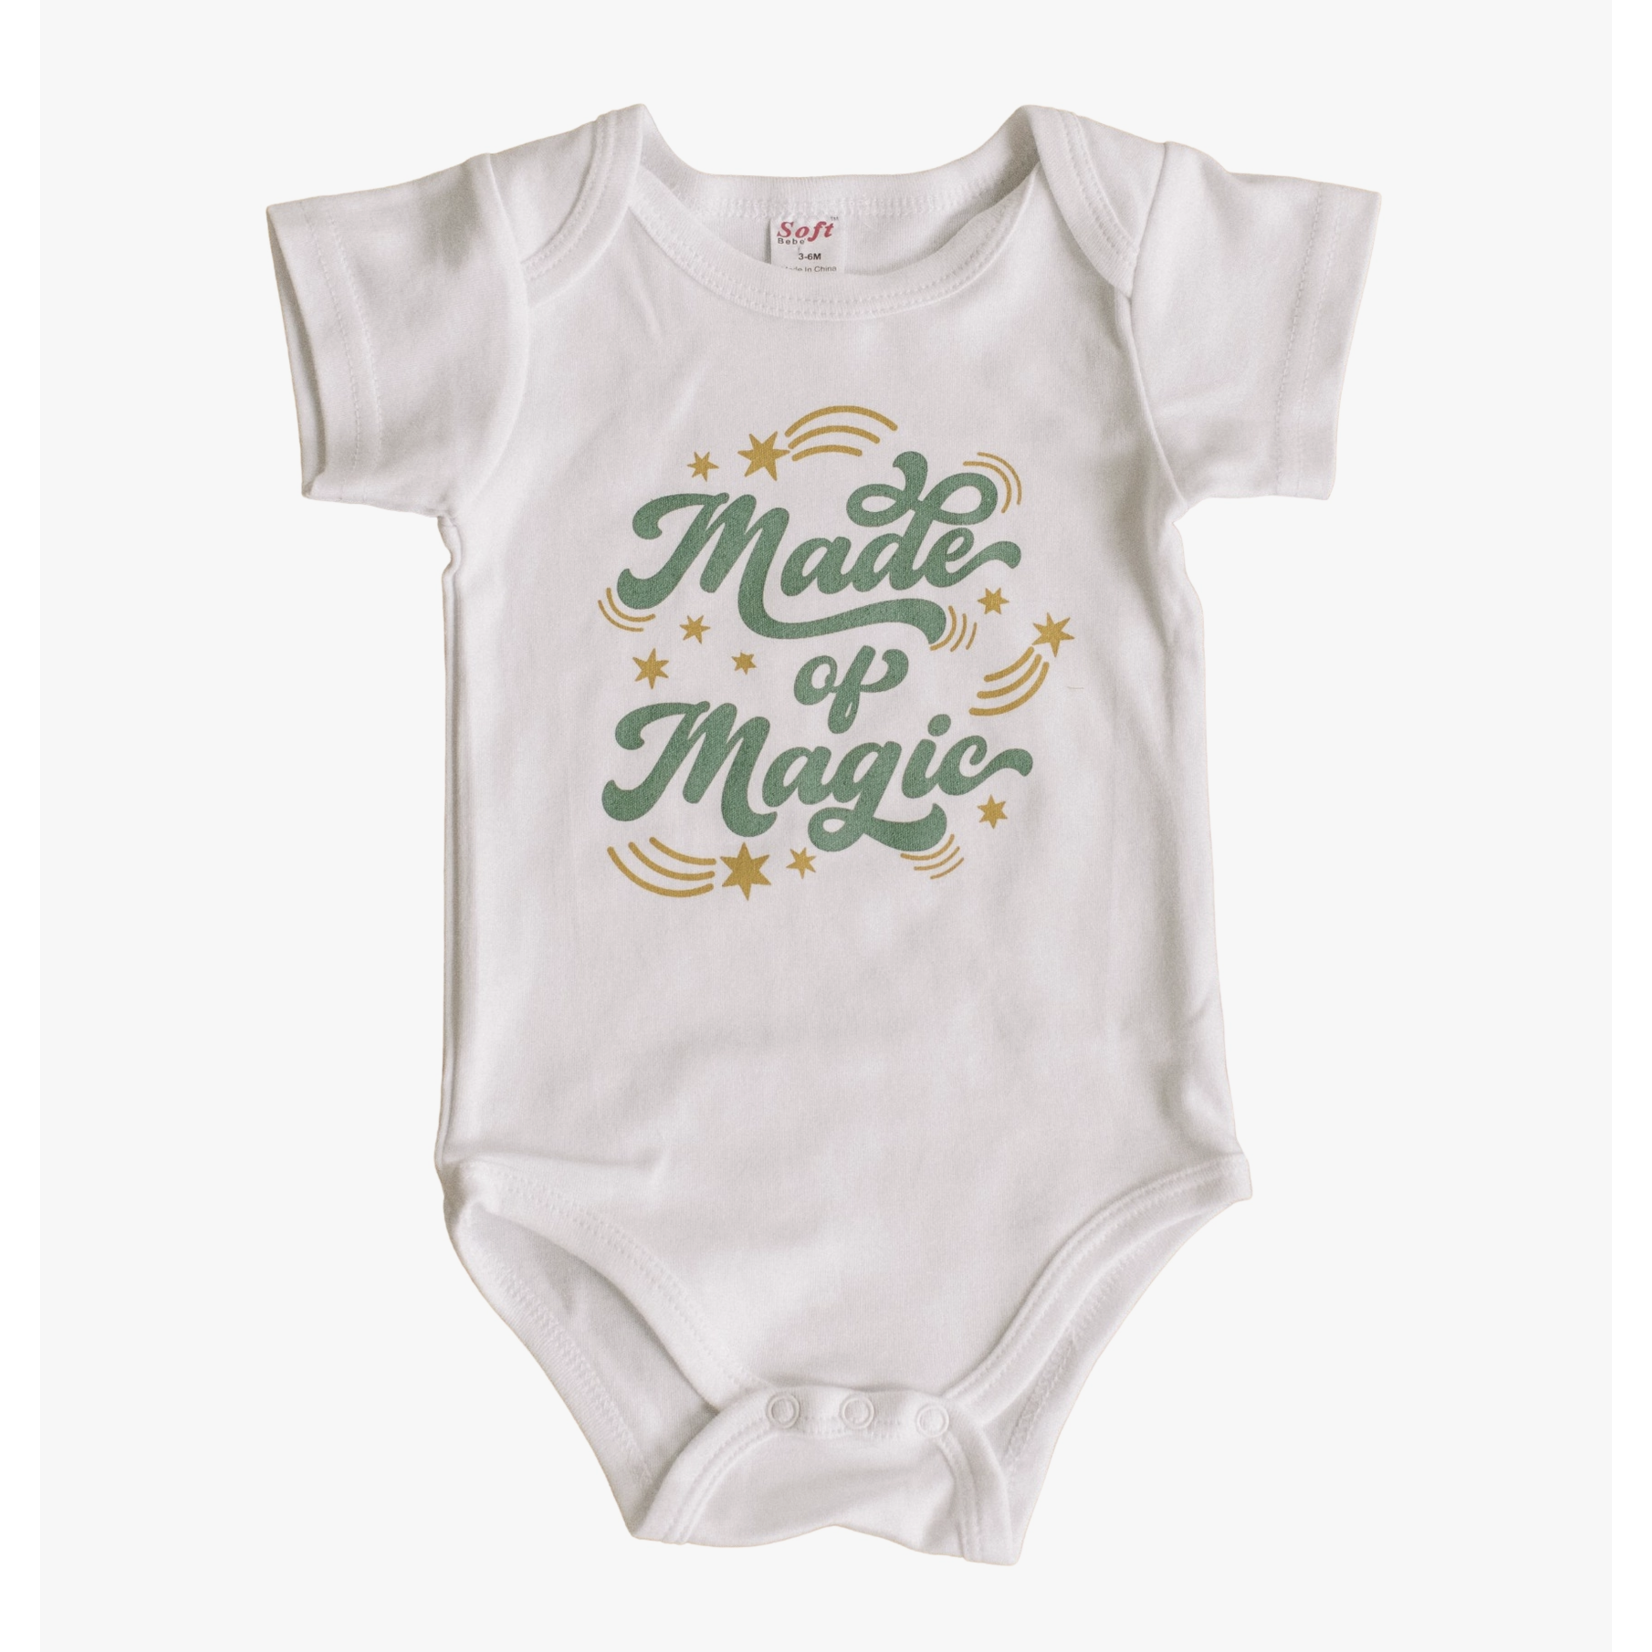 Sweetpea and Co Made of Magic Baby Onesie